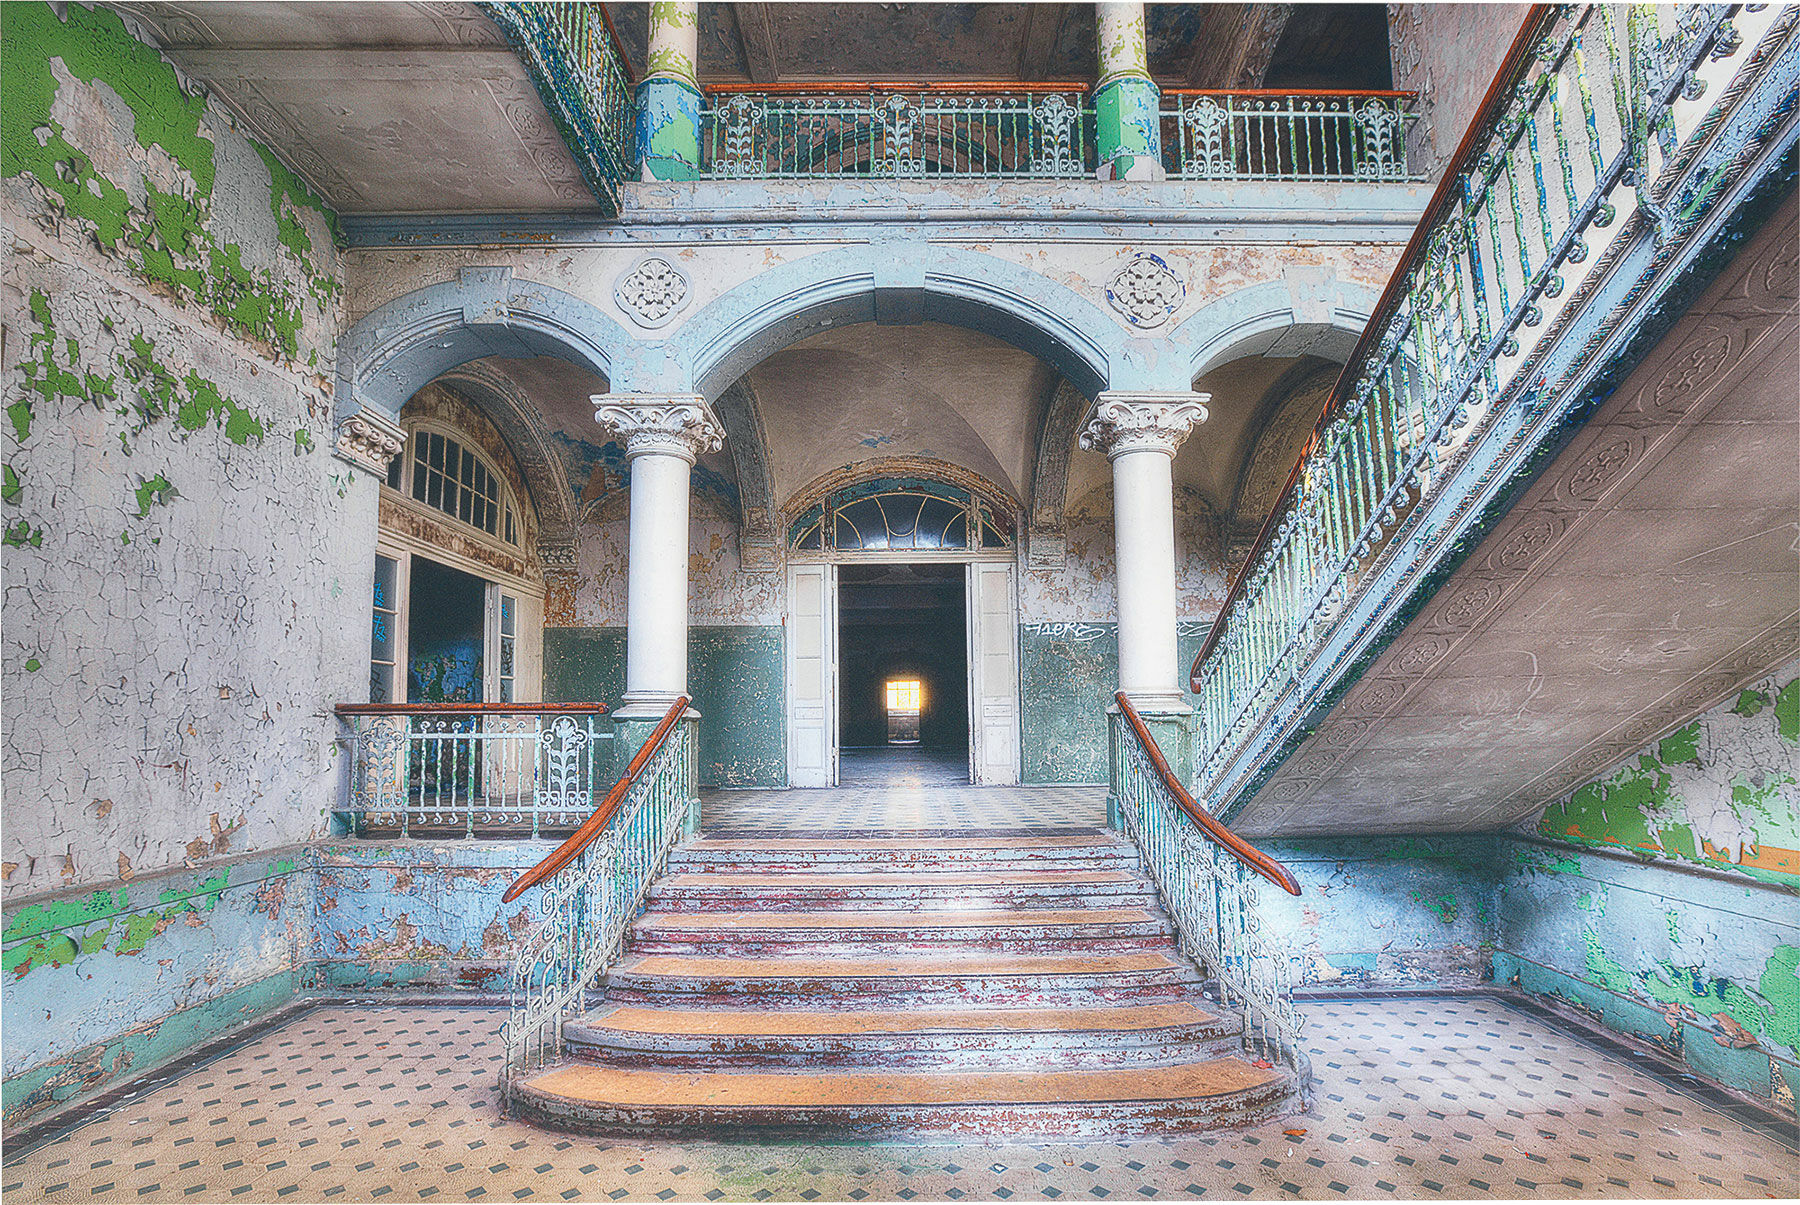 Picture "Entrance with Stairs" by Olivier Lacour